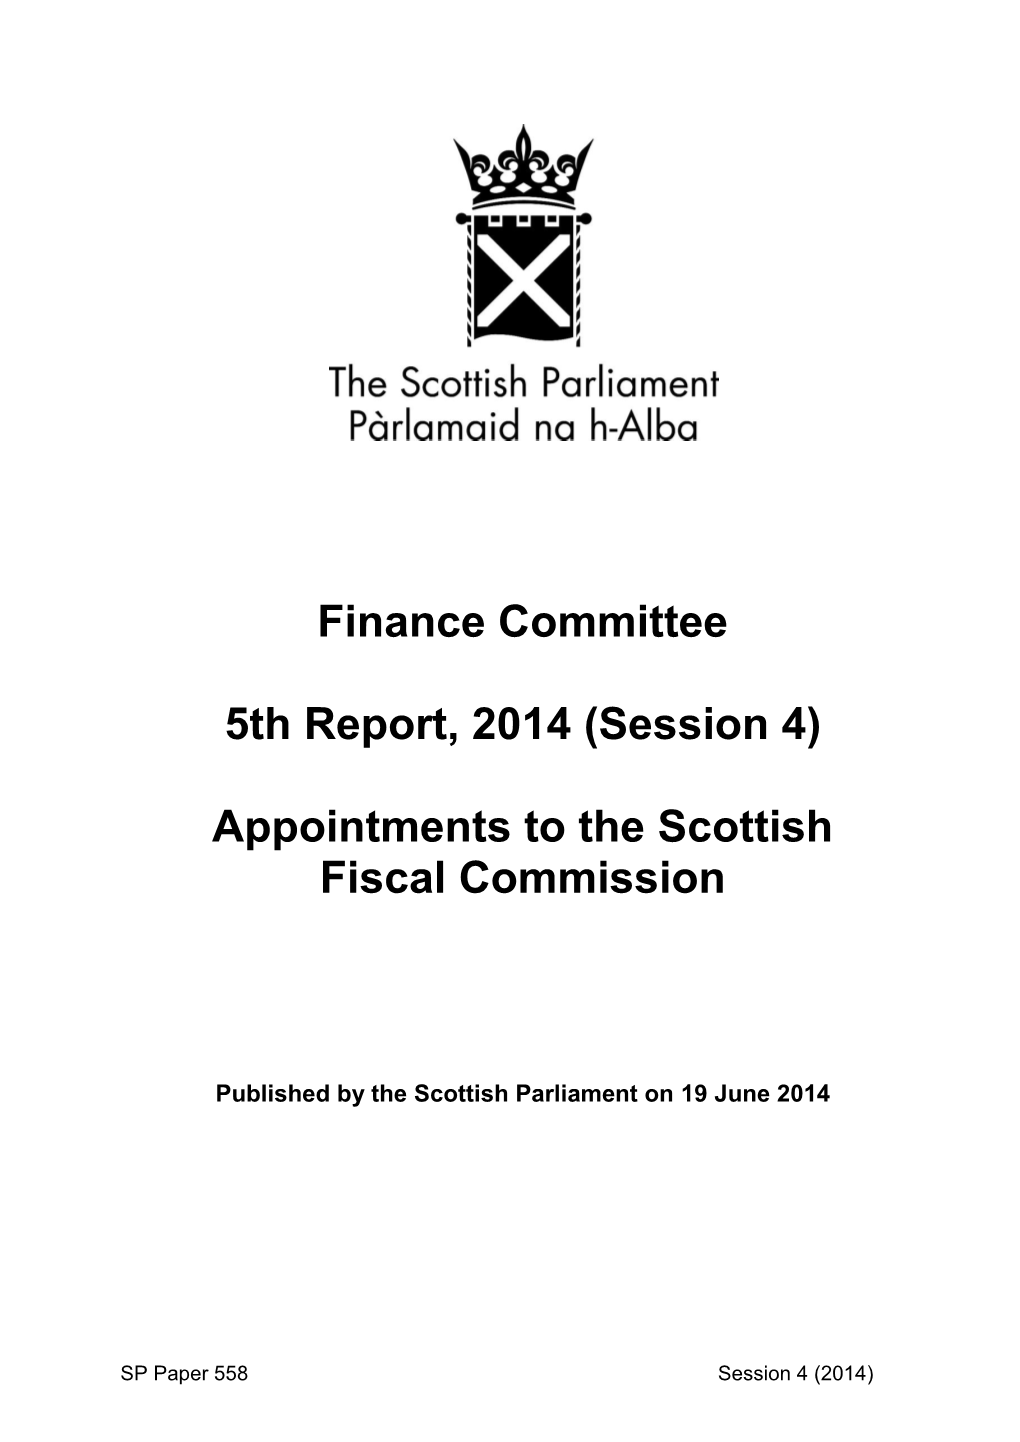 Appointments to the Scottish Fiscal Commission